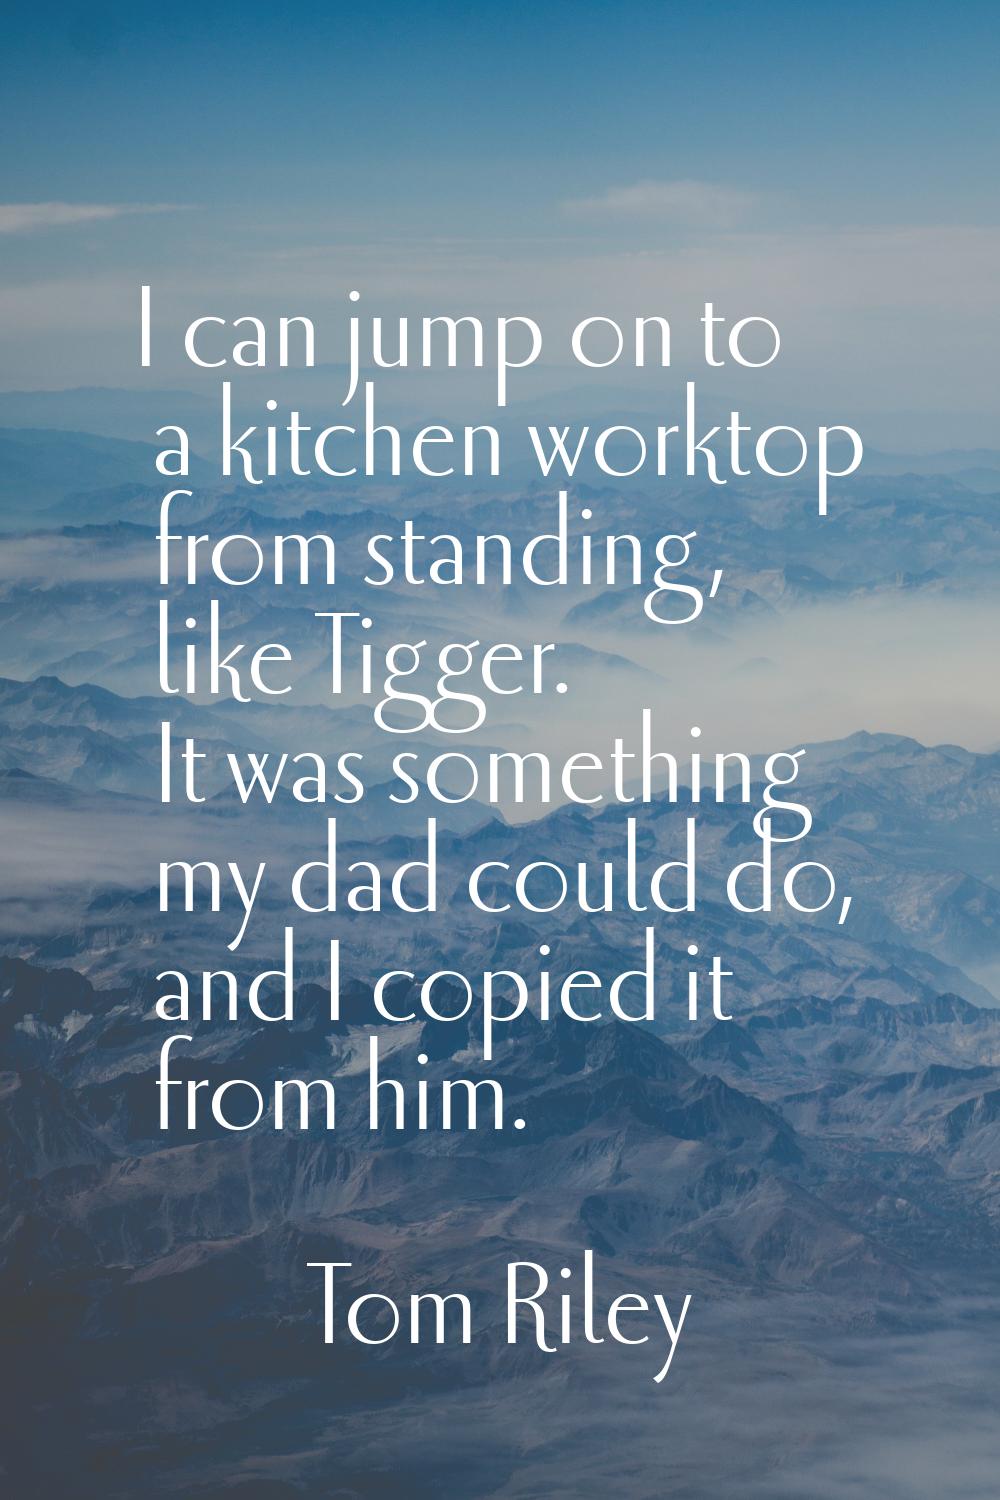 I can jump on to a kitchen worktop from standing, like Tigger. It was something my dad could do, an